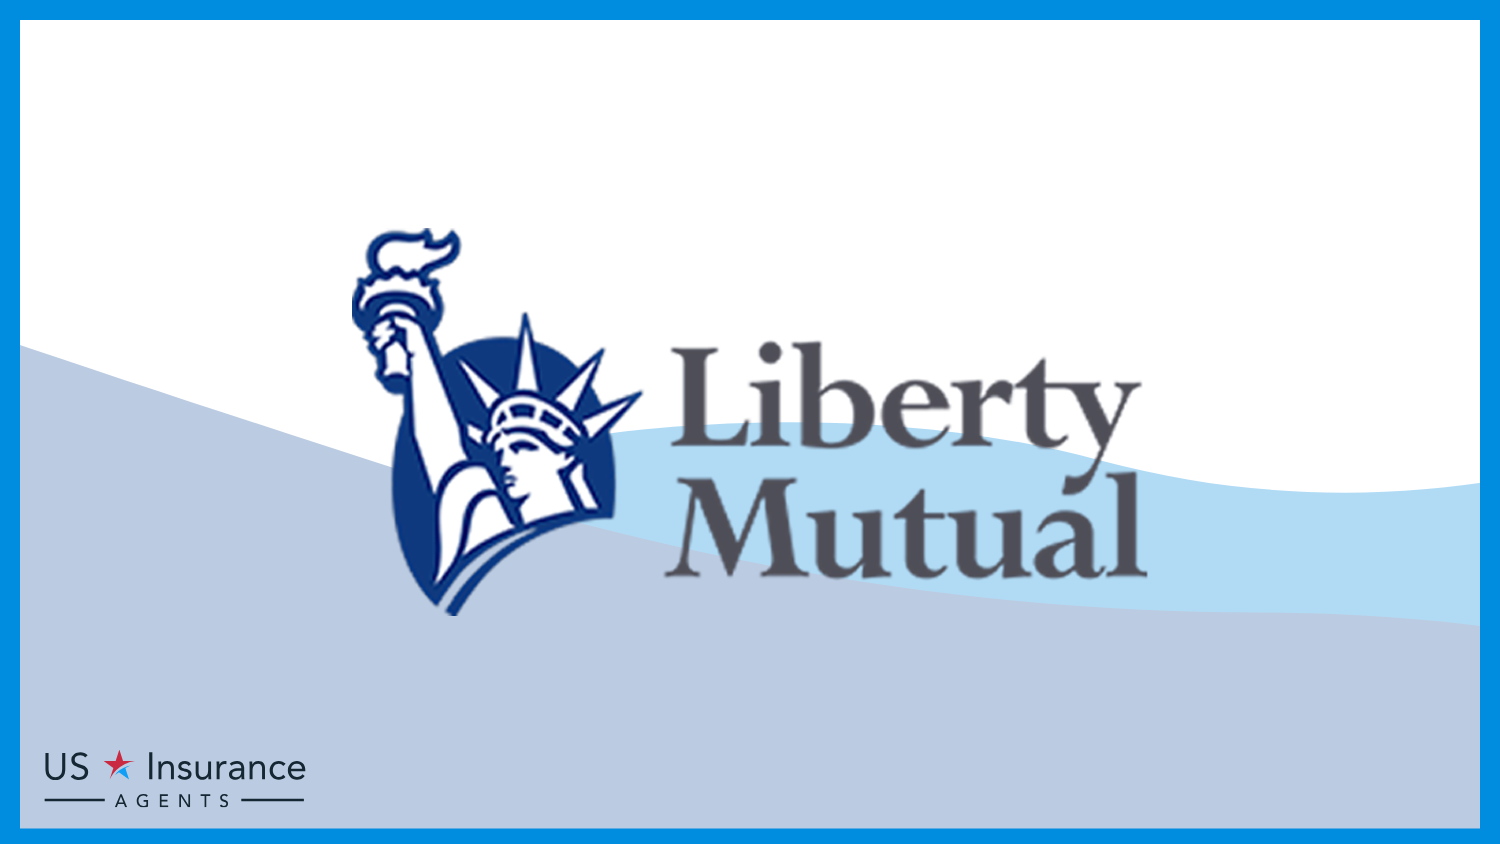 Liberty Mutual: Best Business Insurance for Health Insurance Companies